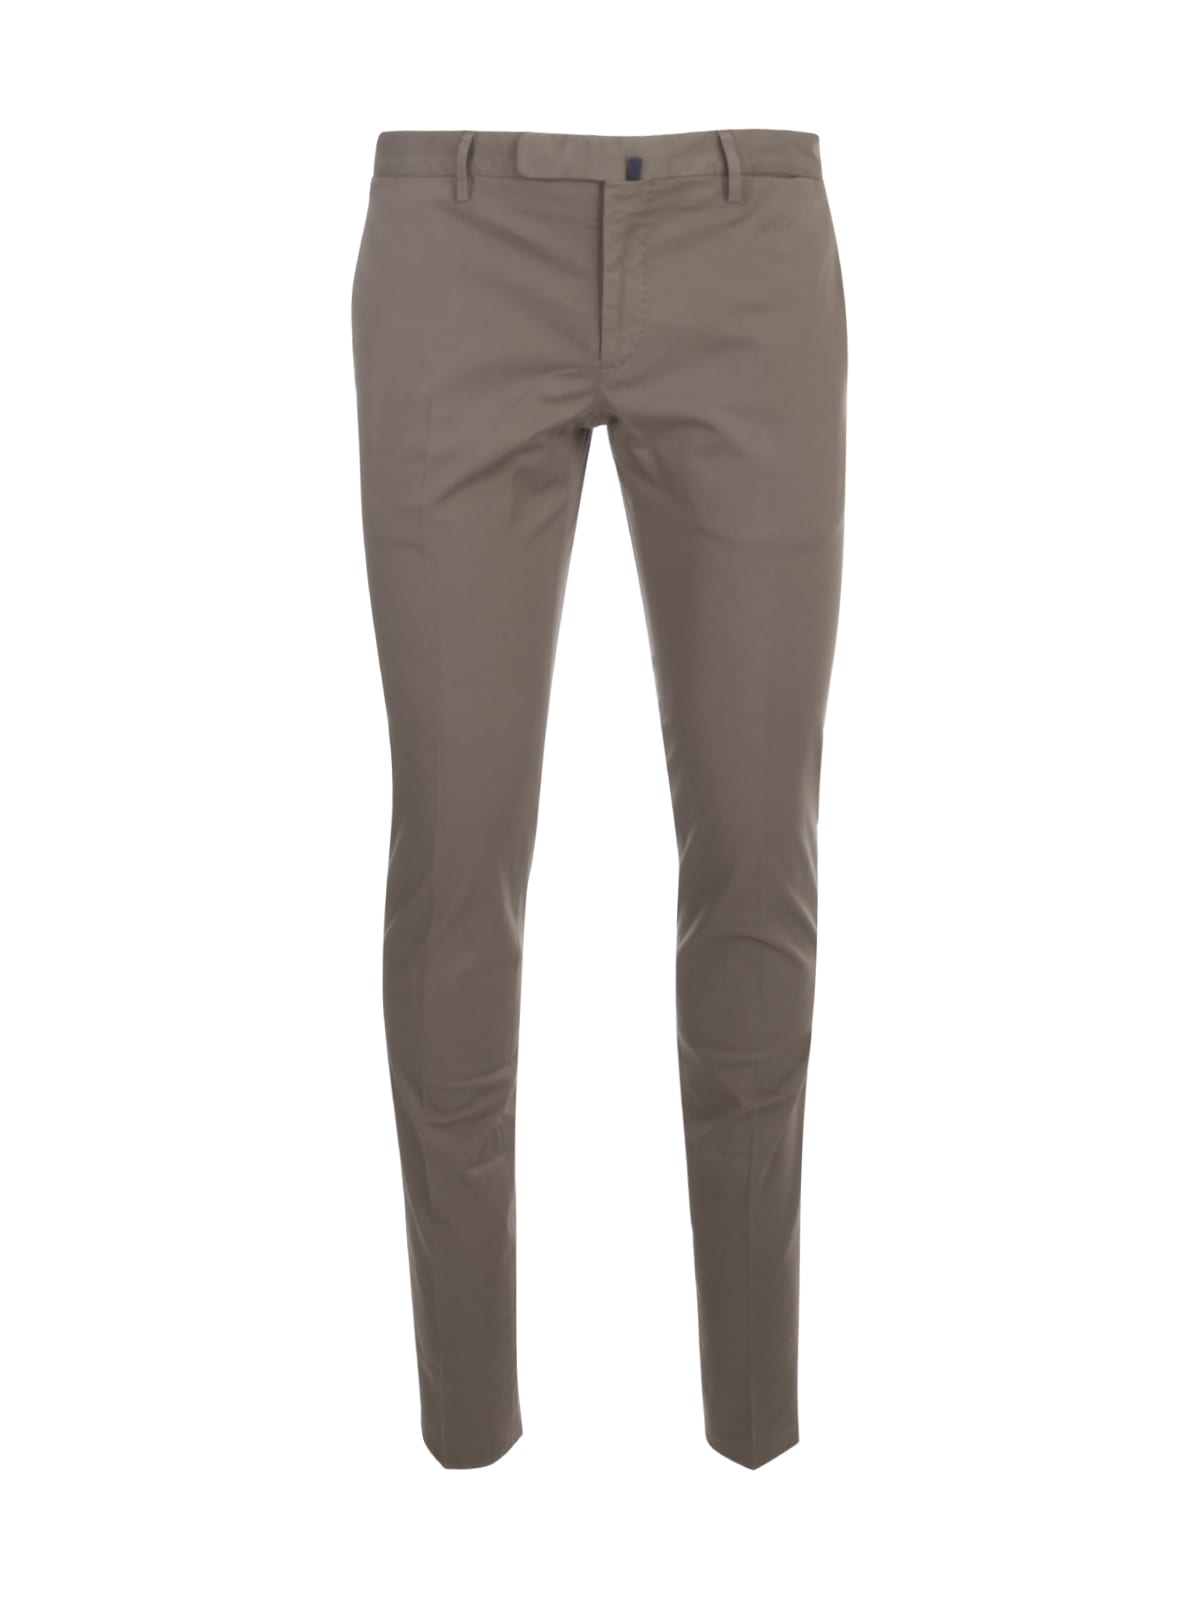 INCOTEX COTTON SLIM FIT trousers,1W0030.9098Y 150 BROWN